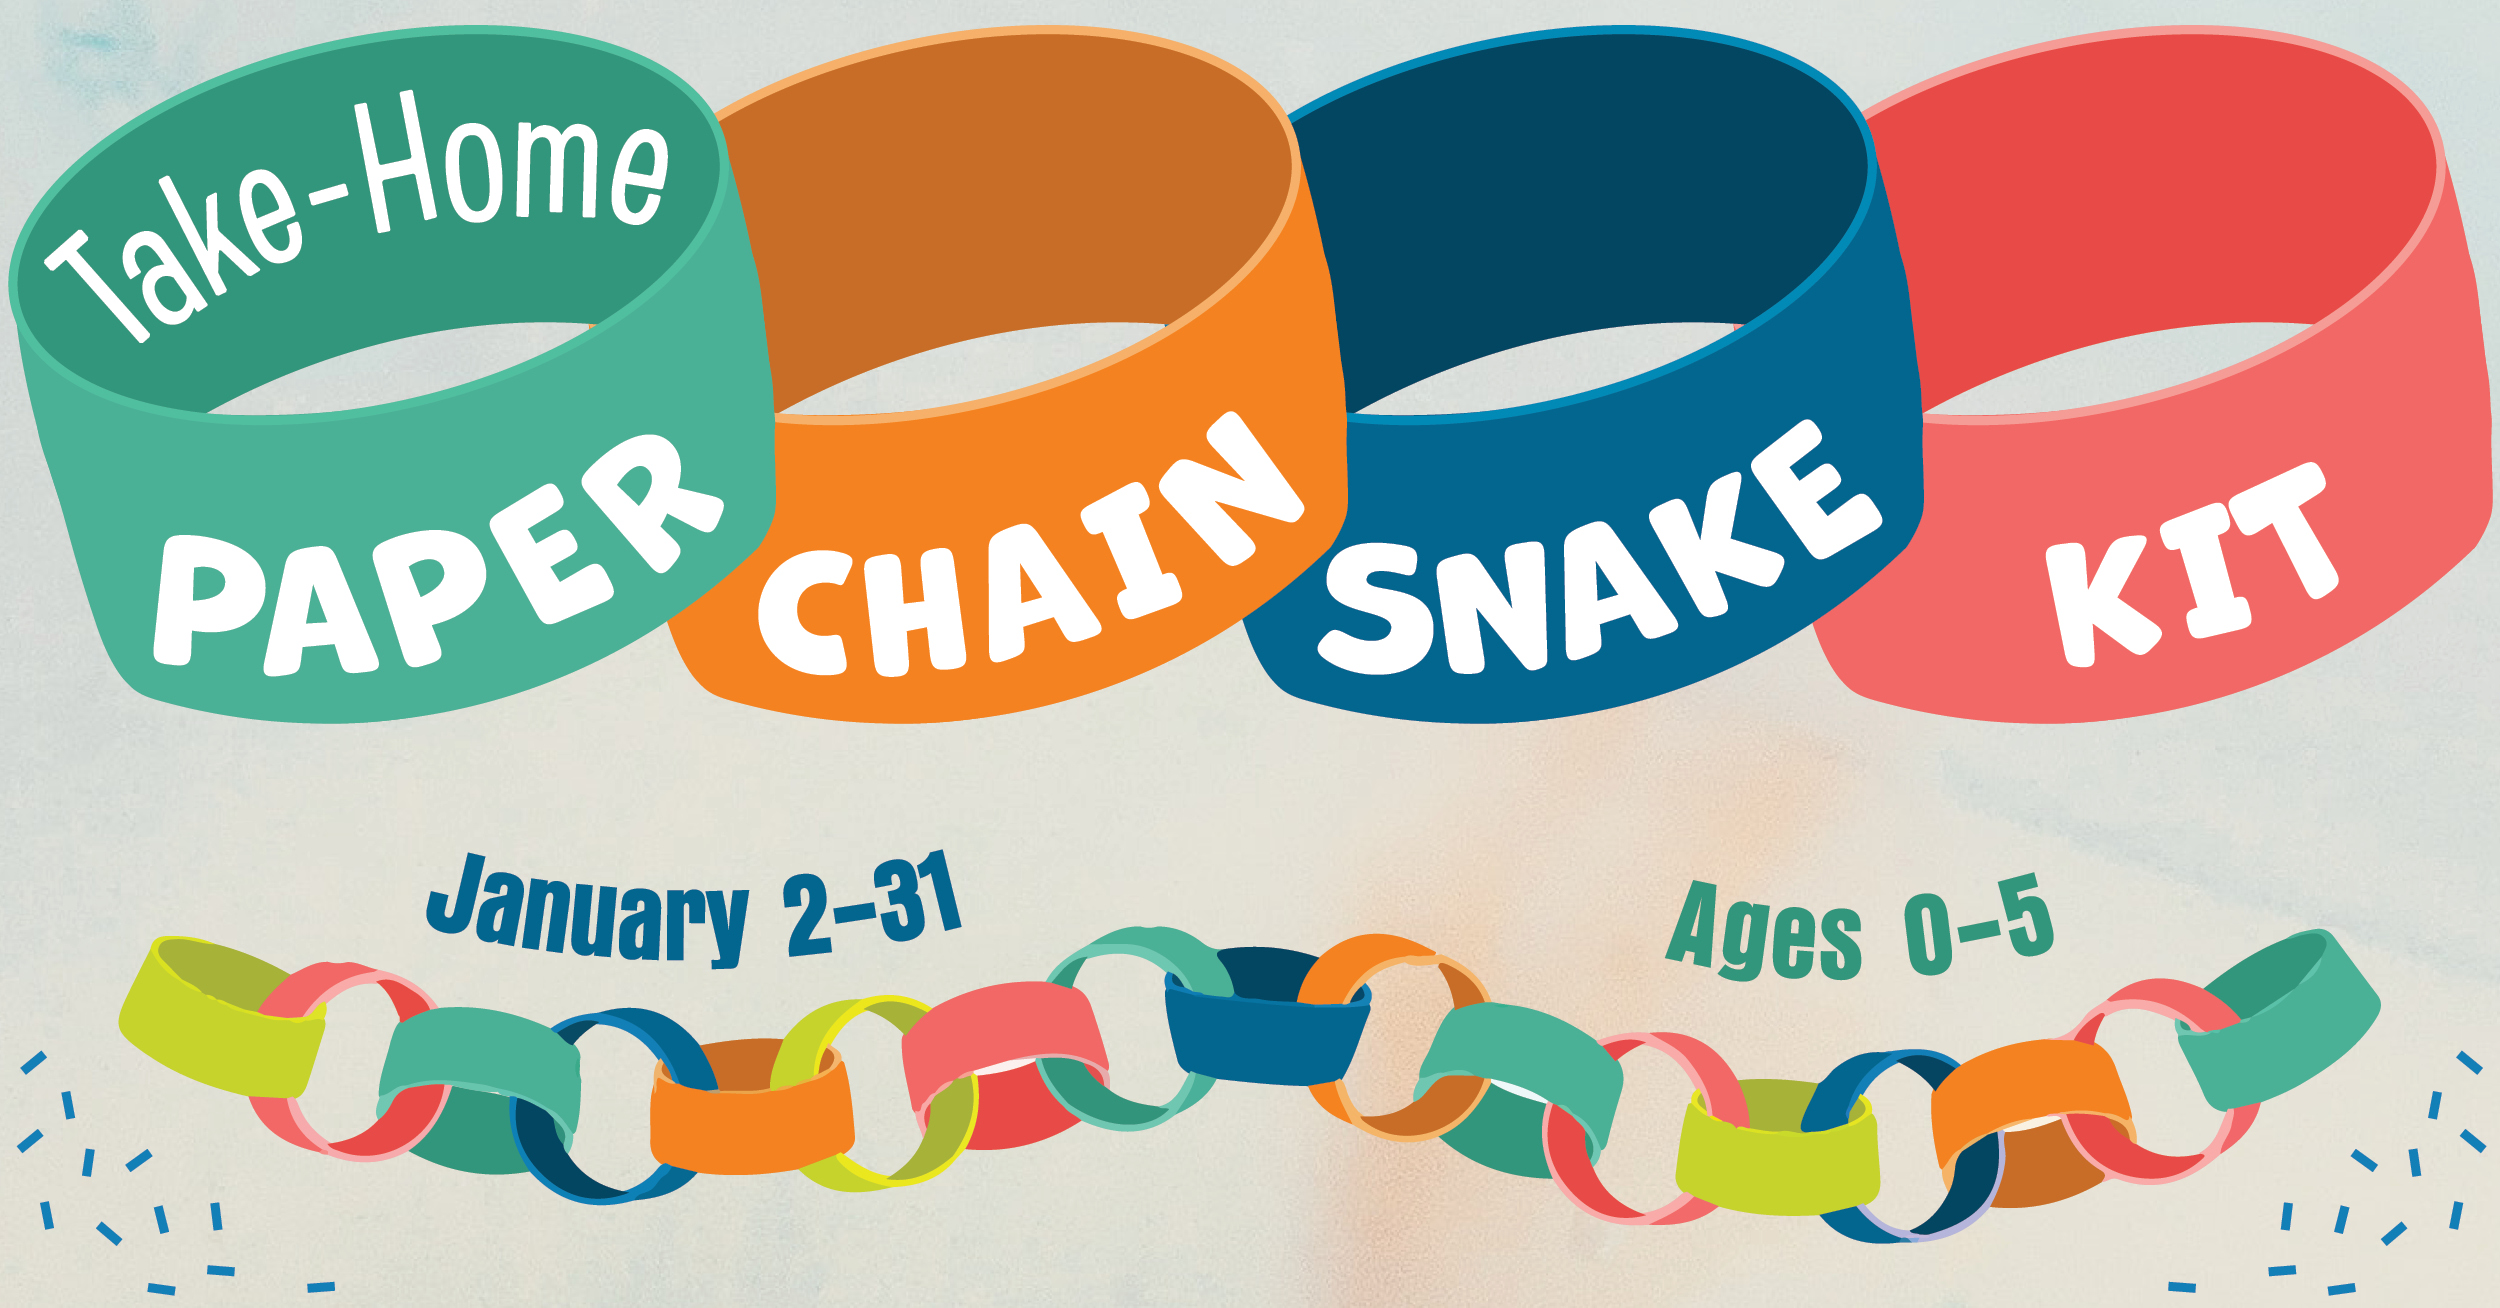 Take-Home Paper Chain Snake Kit. January 2-31. Ages 0-5. Image has paper rings of different colors linked together into a chain.